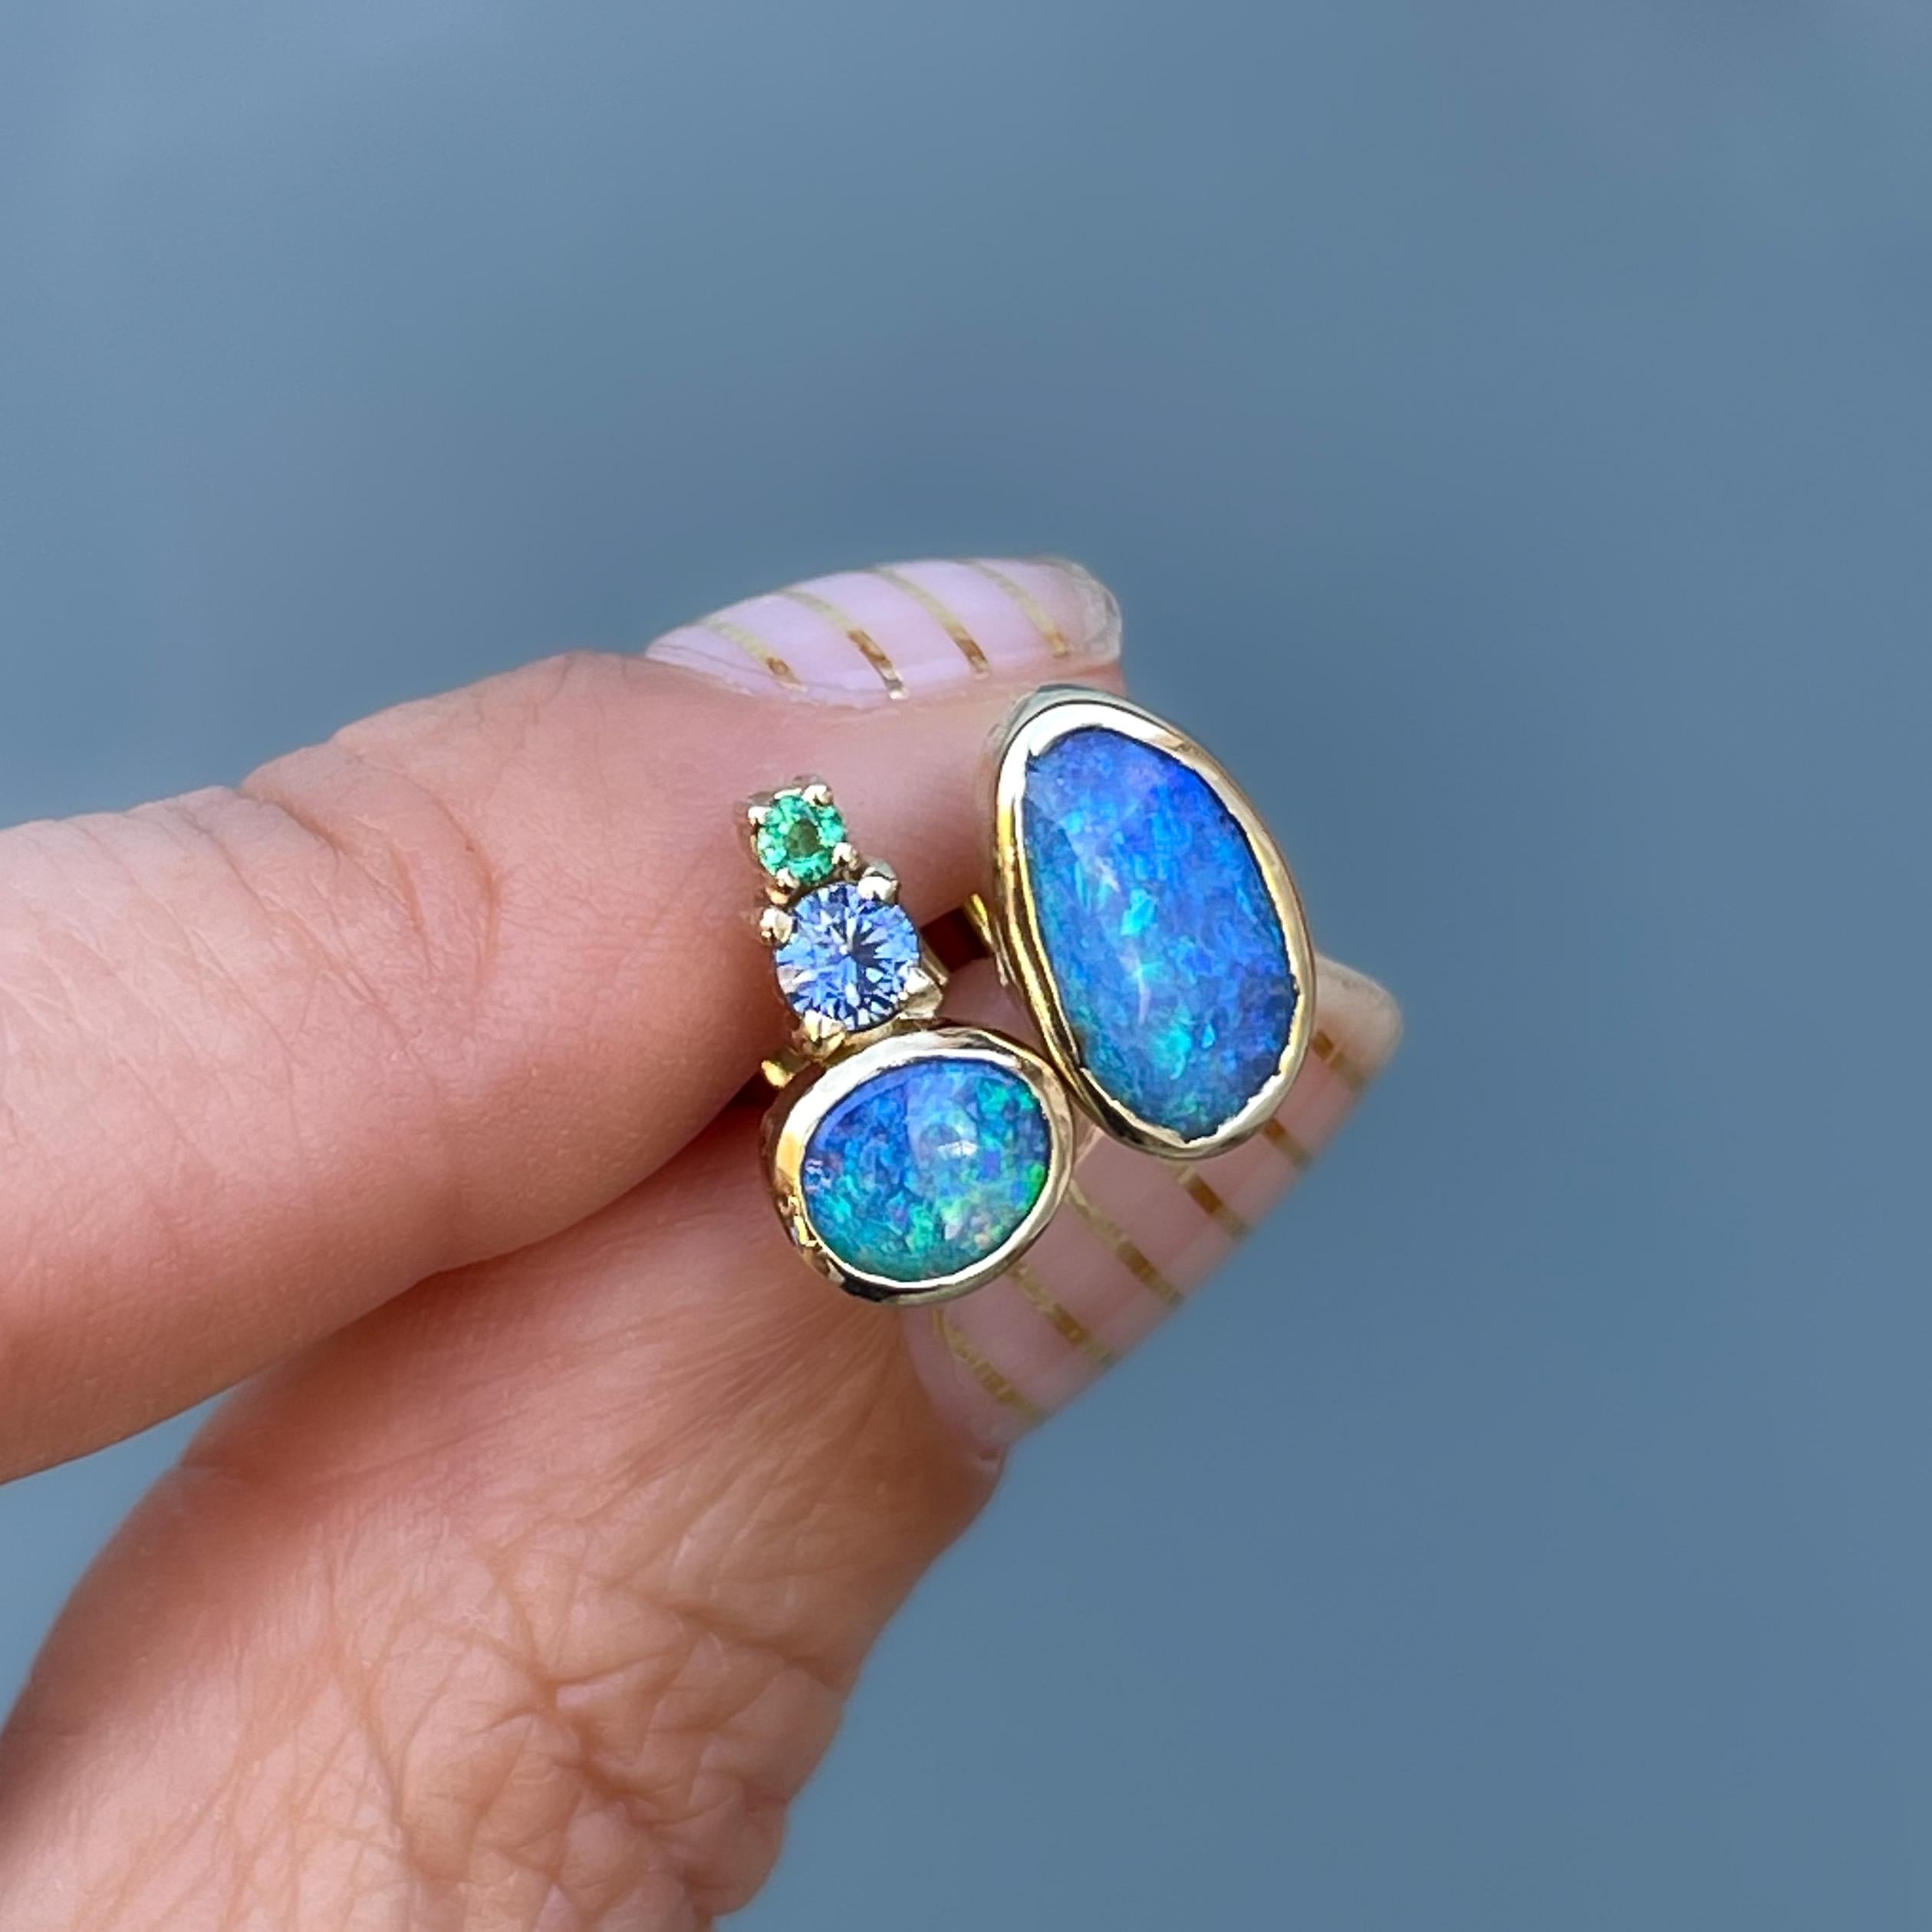 Women's Bali Emerald and Opal Stud Earrings with Sapphire in Gold by NIXIN Jewelry For Sale